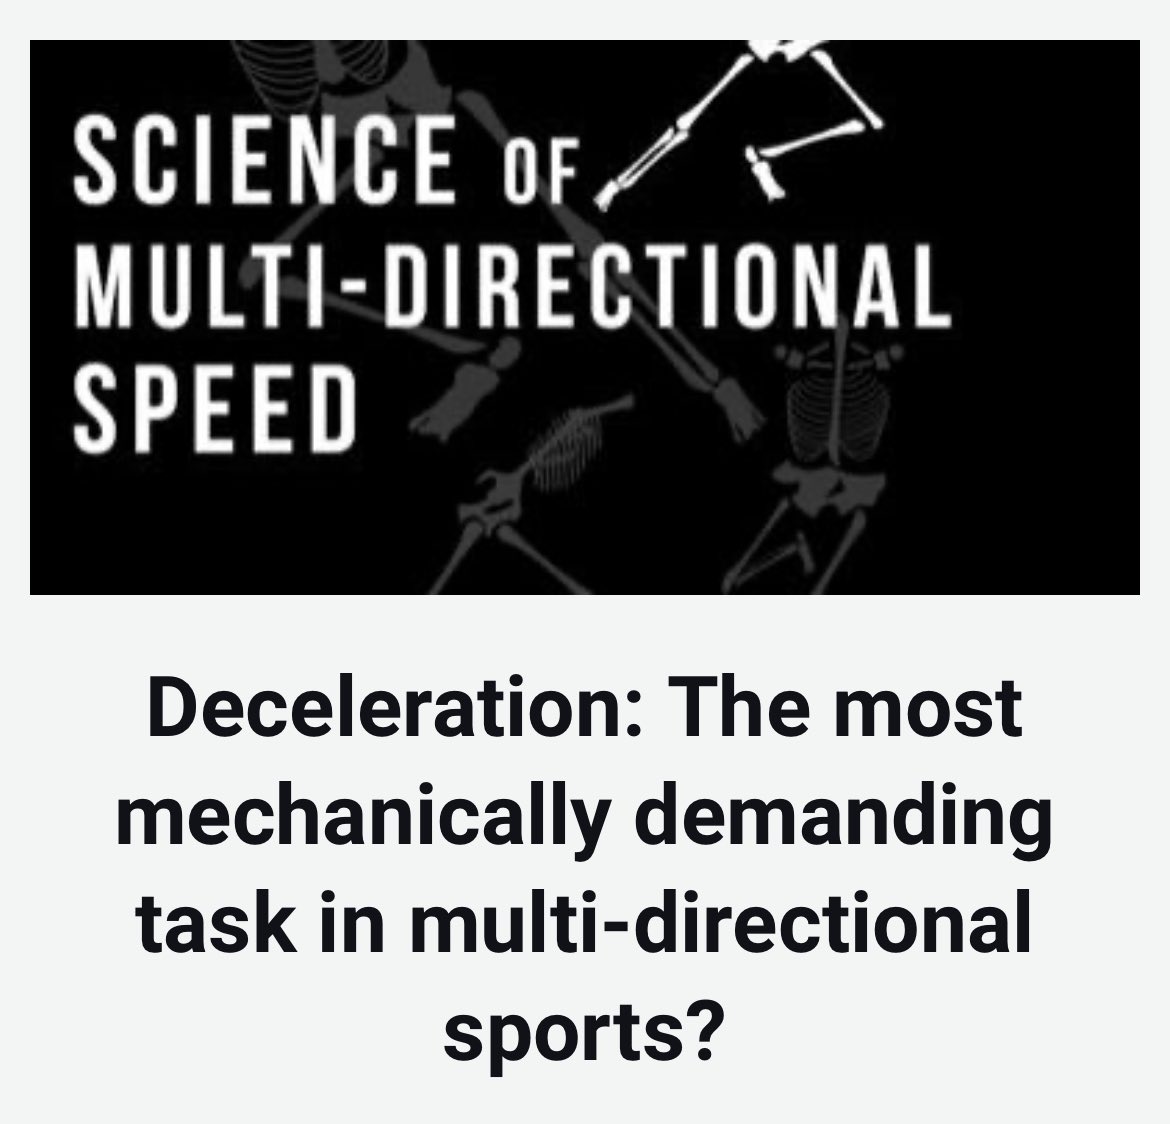 Here’s one of my blogs with @sciofmultispeed done in 2023… DECELERATION: The most mechanically demanding task in multi-directional sports? ⚽️ 🏈🏀🎾🏉 sciofmultispeed.com/deceleration-t… #braking #forces #ACL #sports